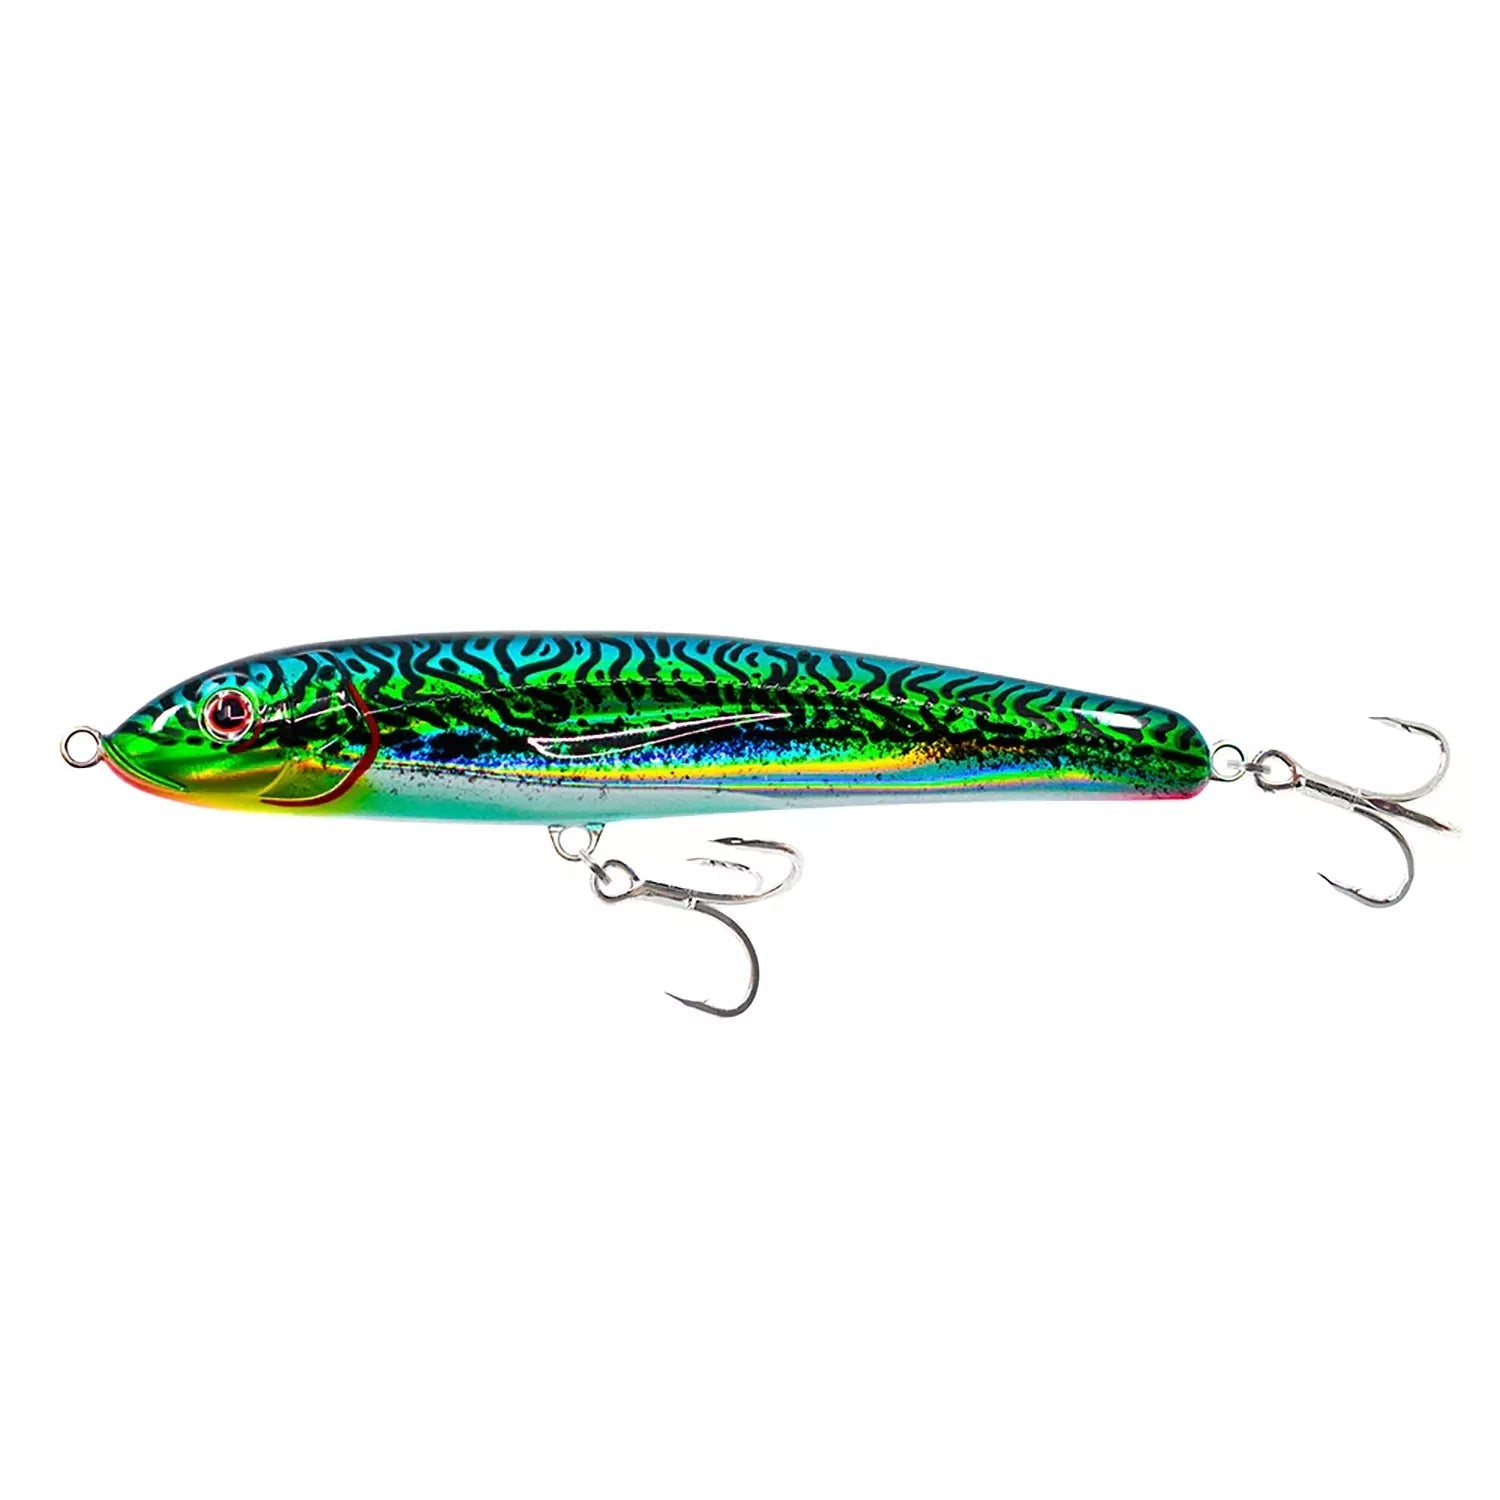 Nomad Design Riptide Slow Sink Lure-Lure - Poppers, Stickbaits & Pencils-Nomad-125mm-Silver Green Mackerel-Fishing Station